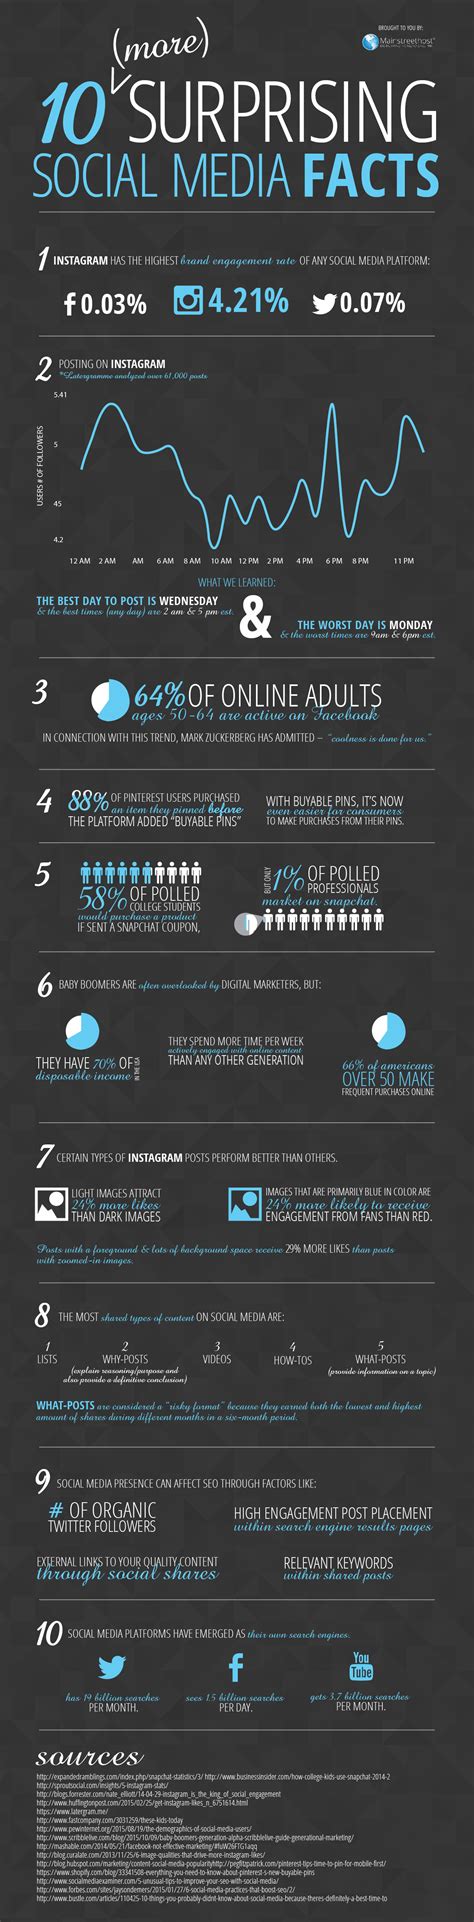 10 More Surprising Social Media Facts Infographic